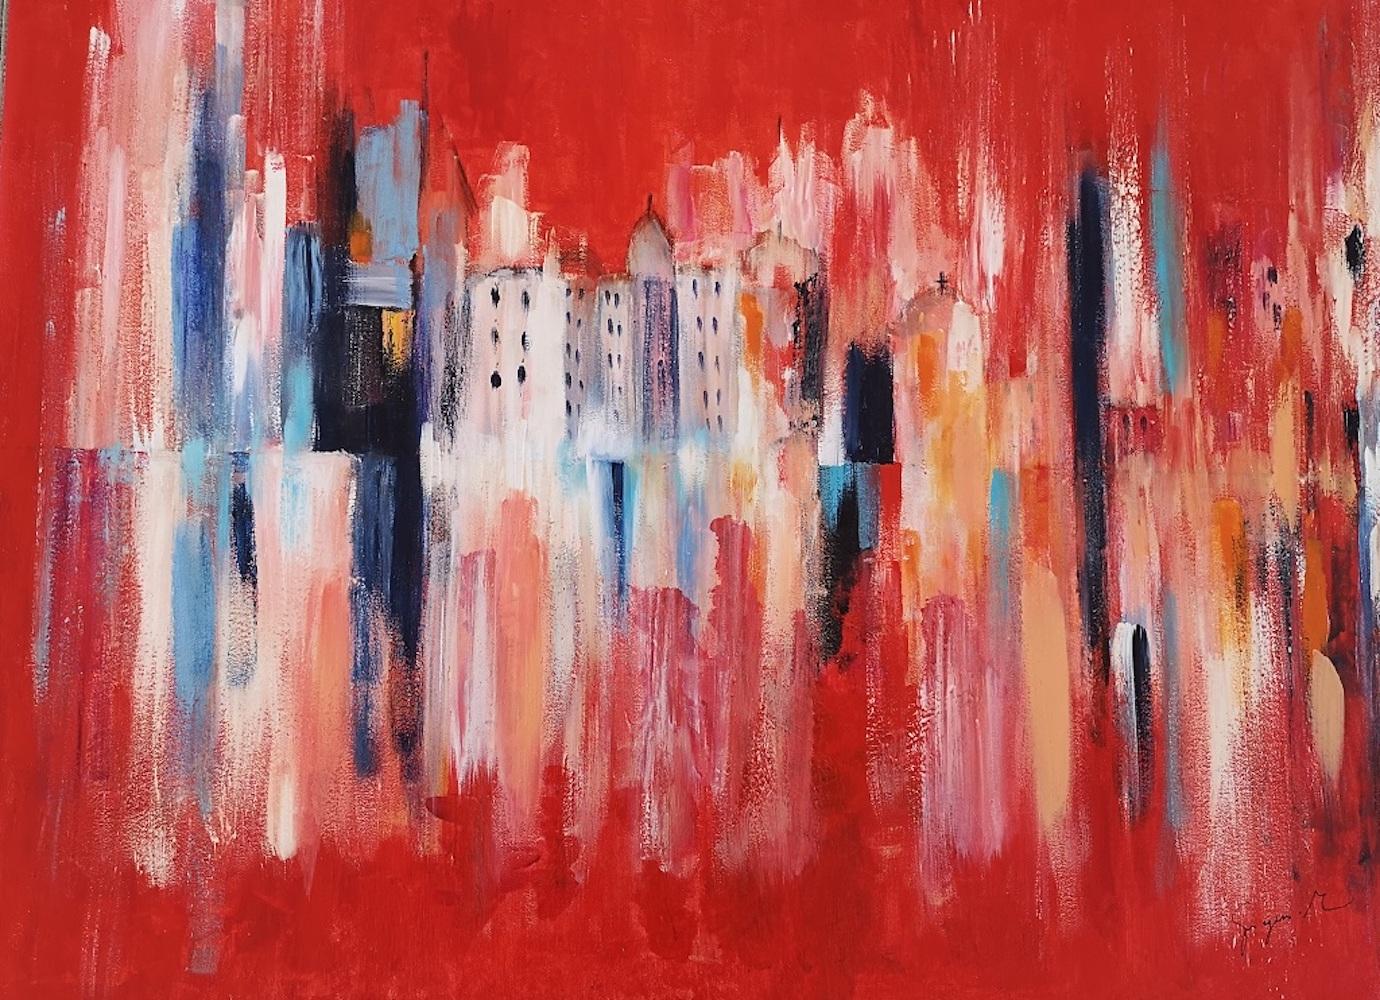 Martine Goeyens Landscape Painting - Red Landscape - Acrylic on Canvas by M. Goeyens - 2000s